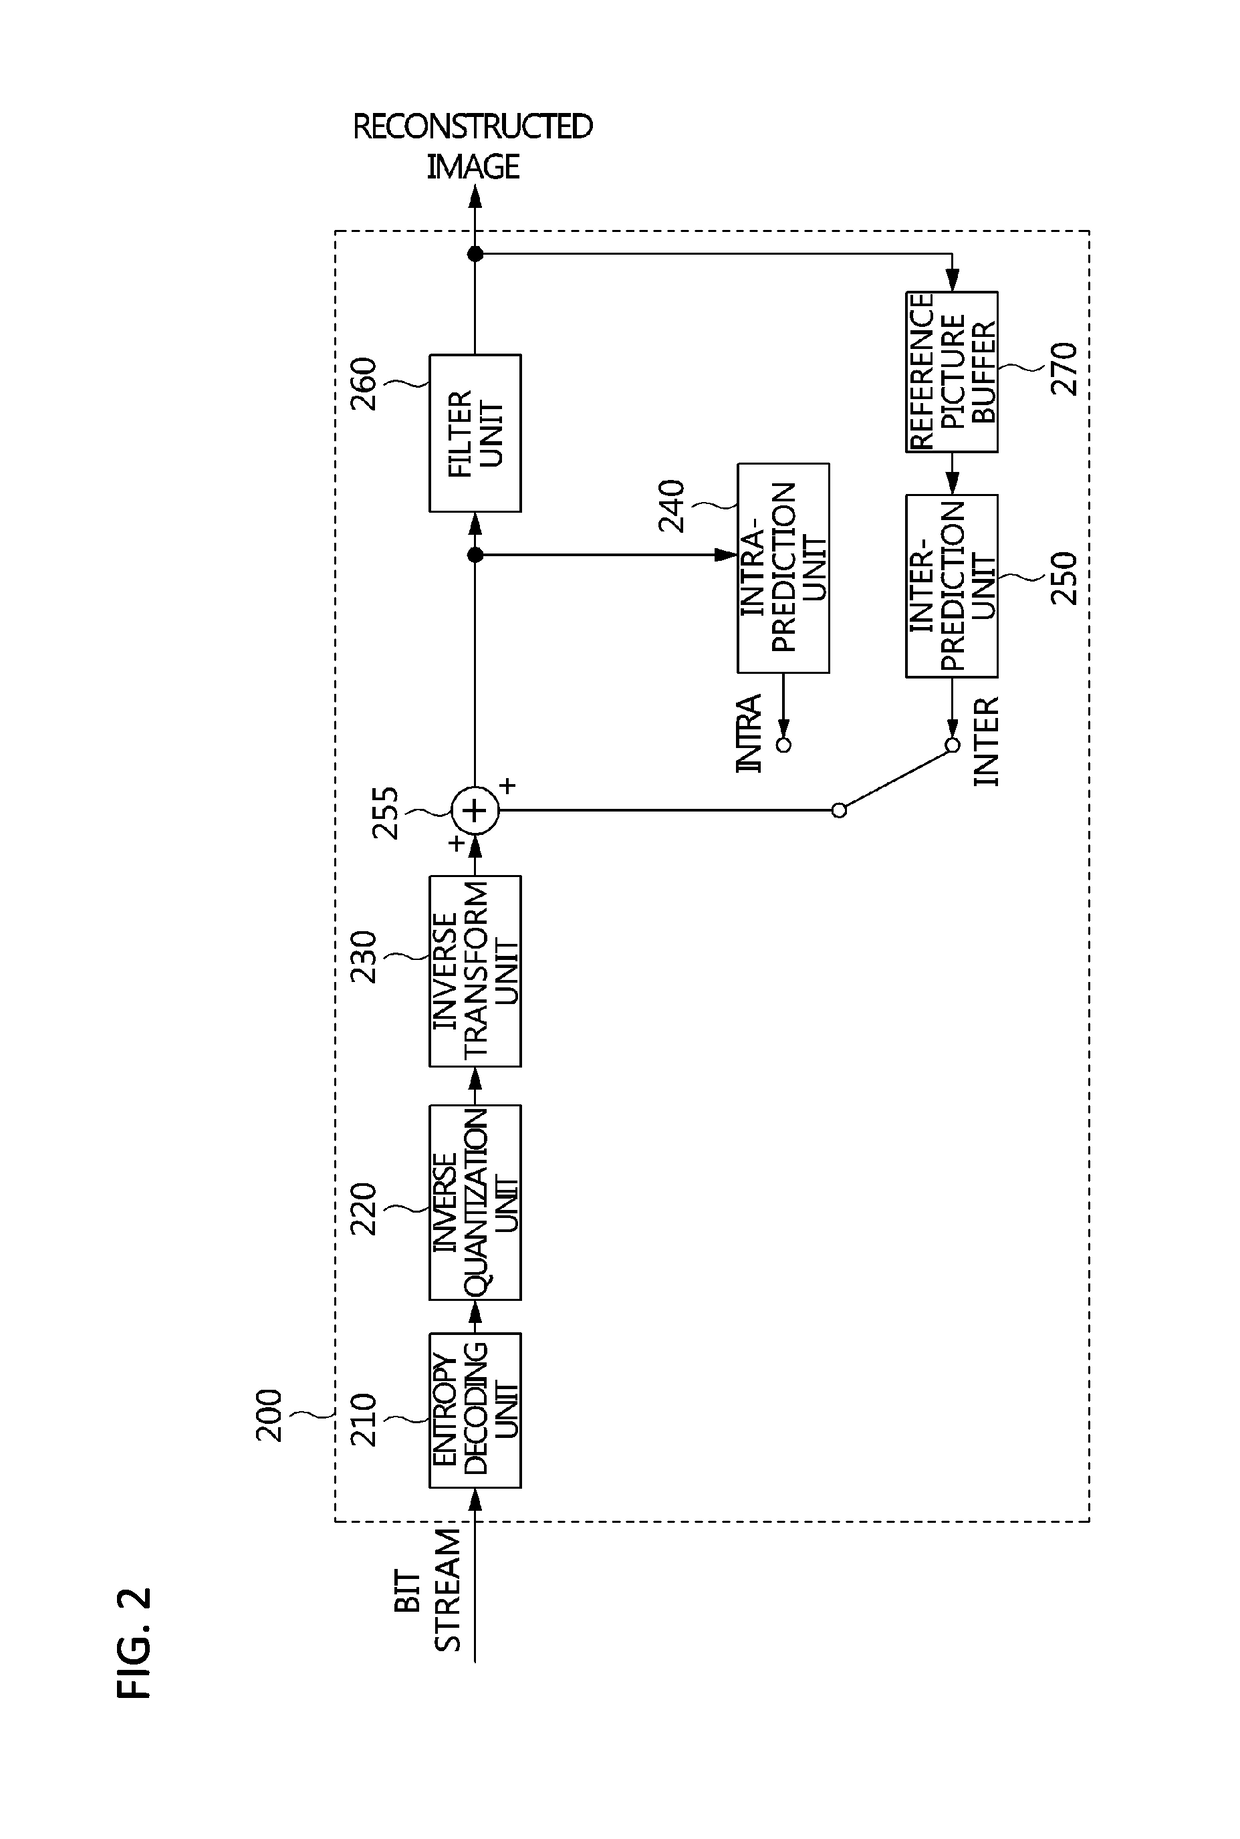 Method and apparatus for adaptive encoding and decoding based on image quality